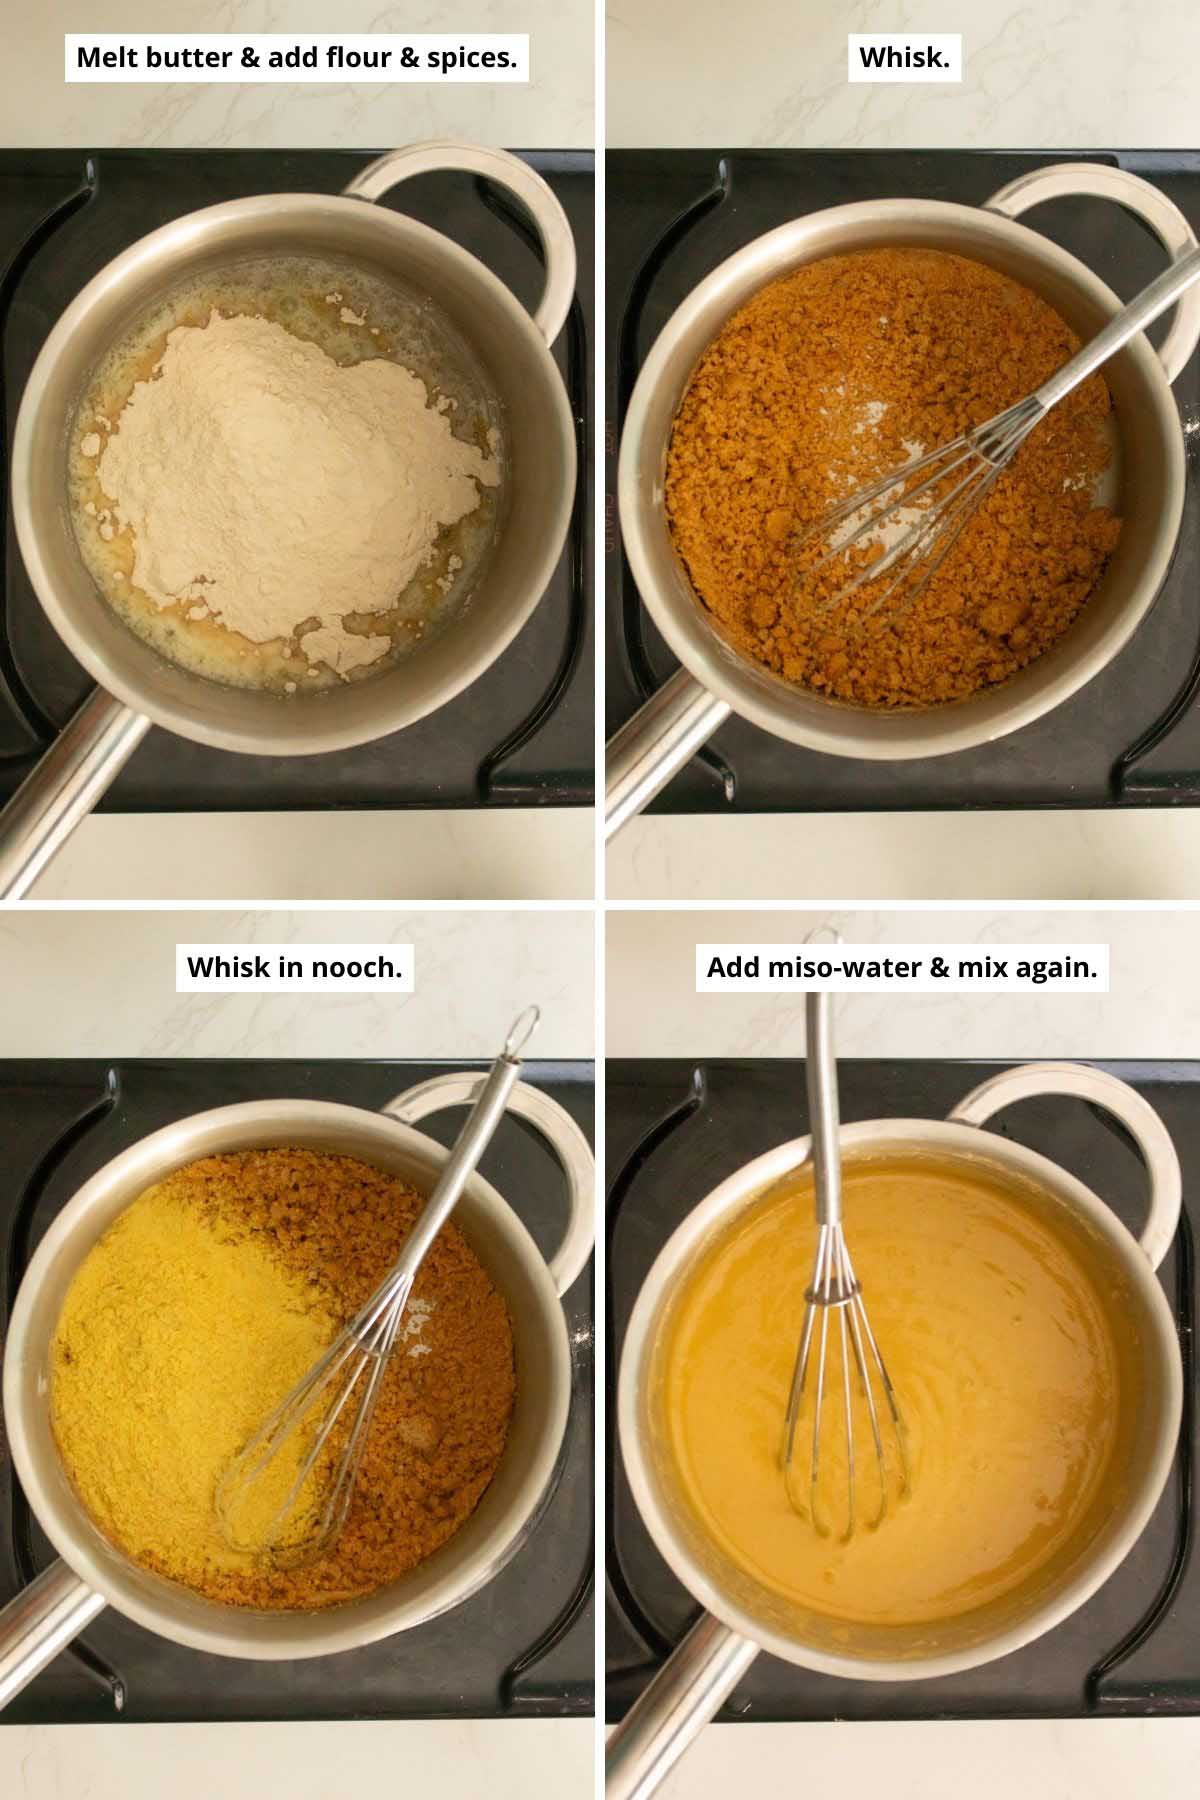 image collage showing the pan with the flour and butter before and after mixing, adding the nutritional yeast, and the vegan cheese sauce in the pan after mixing in the miso-water